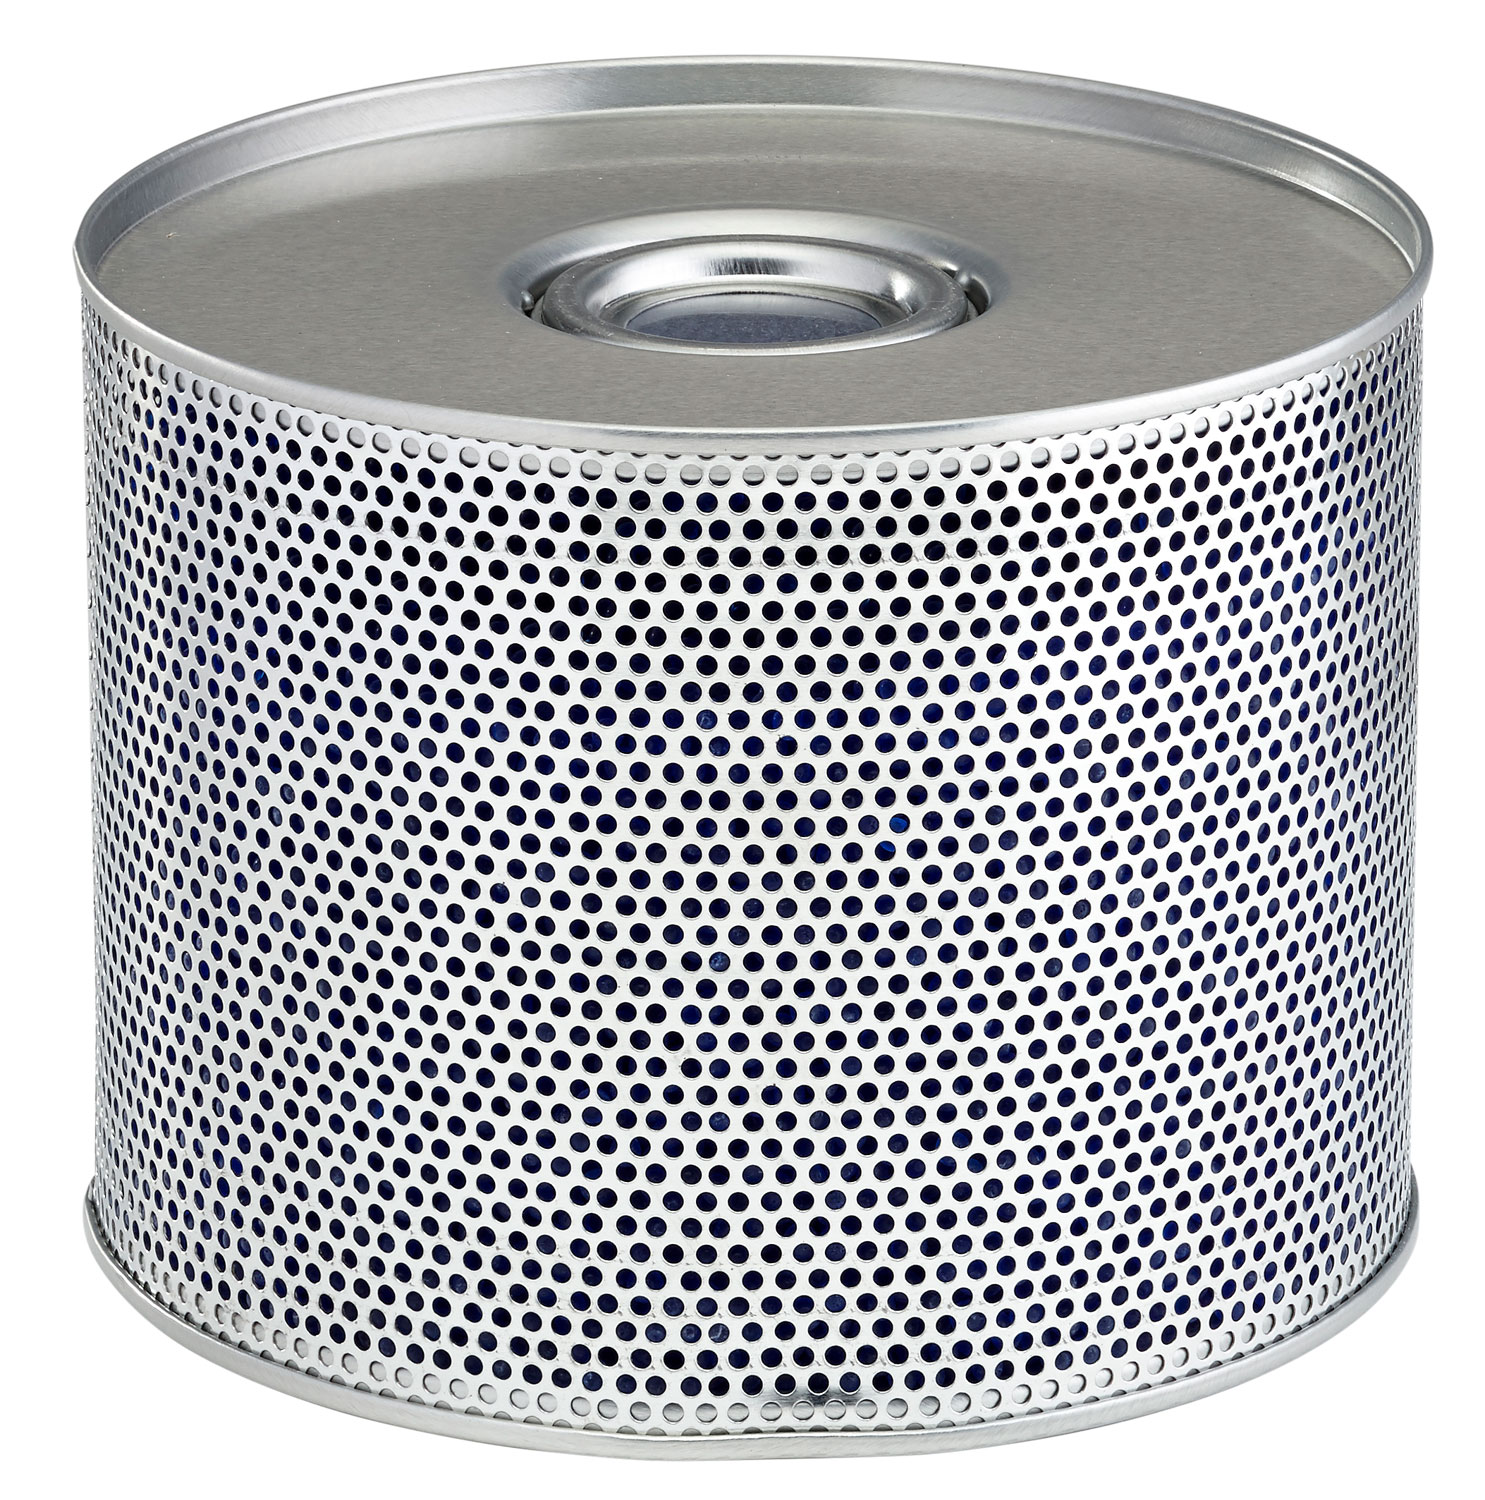 SNAPSAFE DEHUMIDIFIER CANISTER